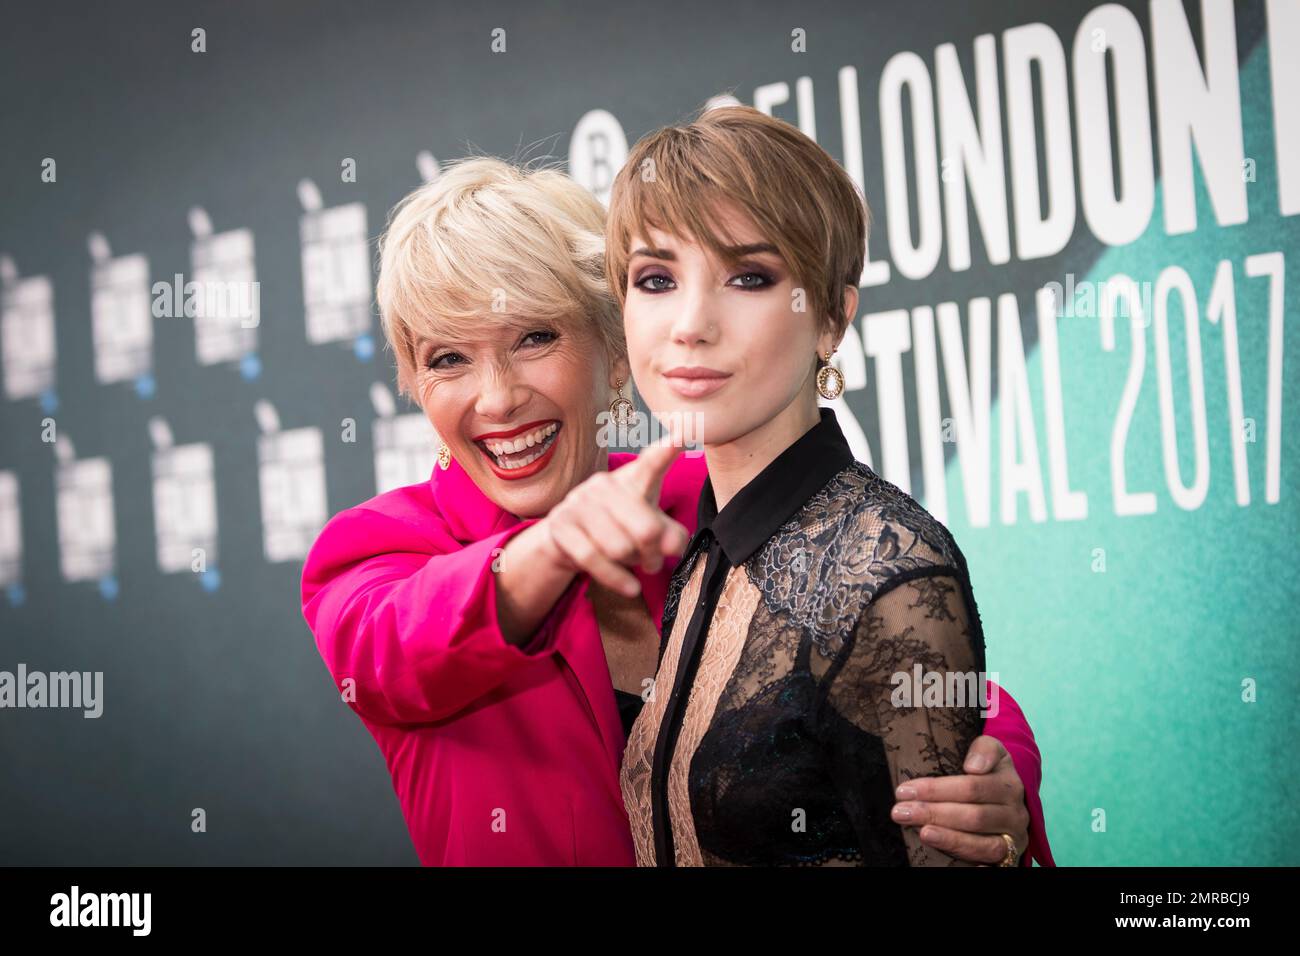 Actress Emma Thompson Left Poses With Her Daughter Gaia Romilly Wise For Photographers Upon 